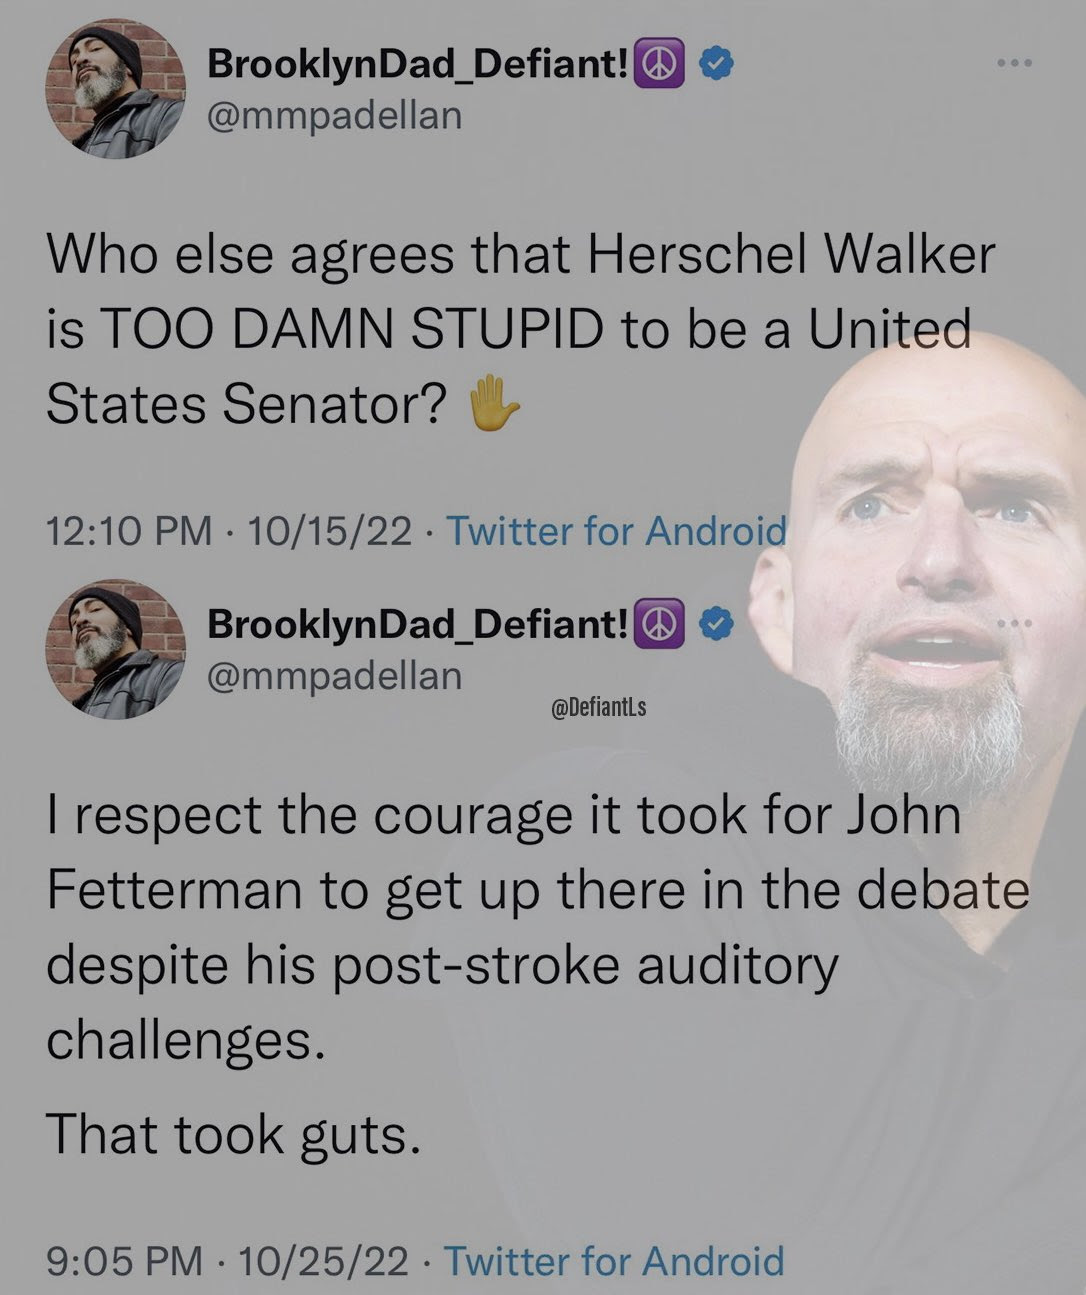 Hypocrite post by mmpadellan where says Herschel Walkeer is stupid, but Fetterman, suffering from a stroke and unable to talk right is gutsy.